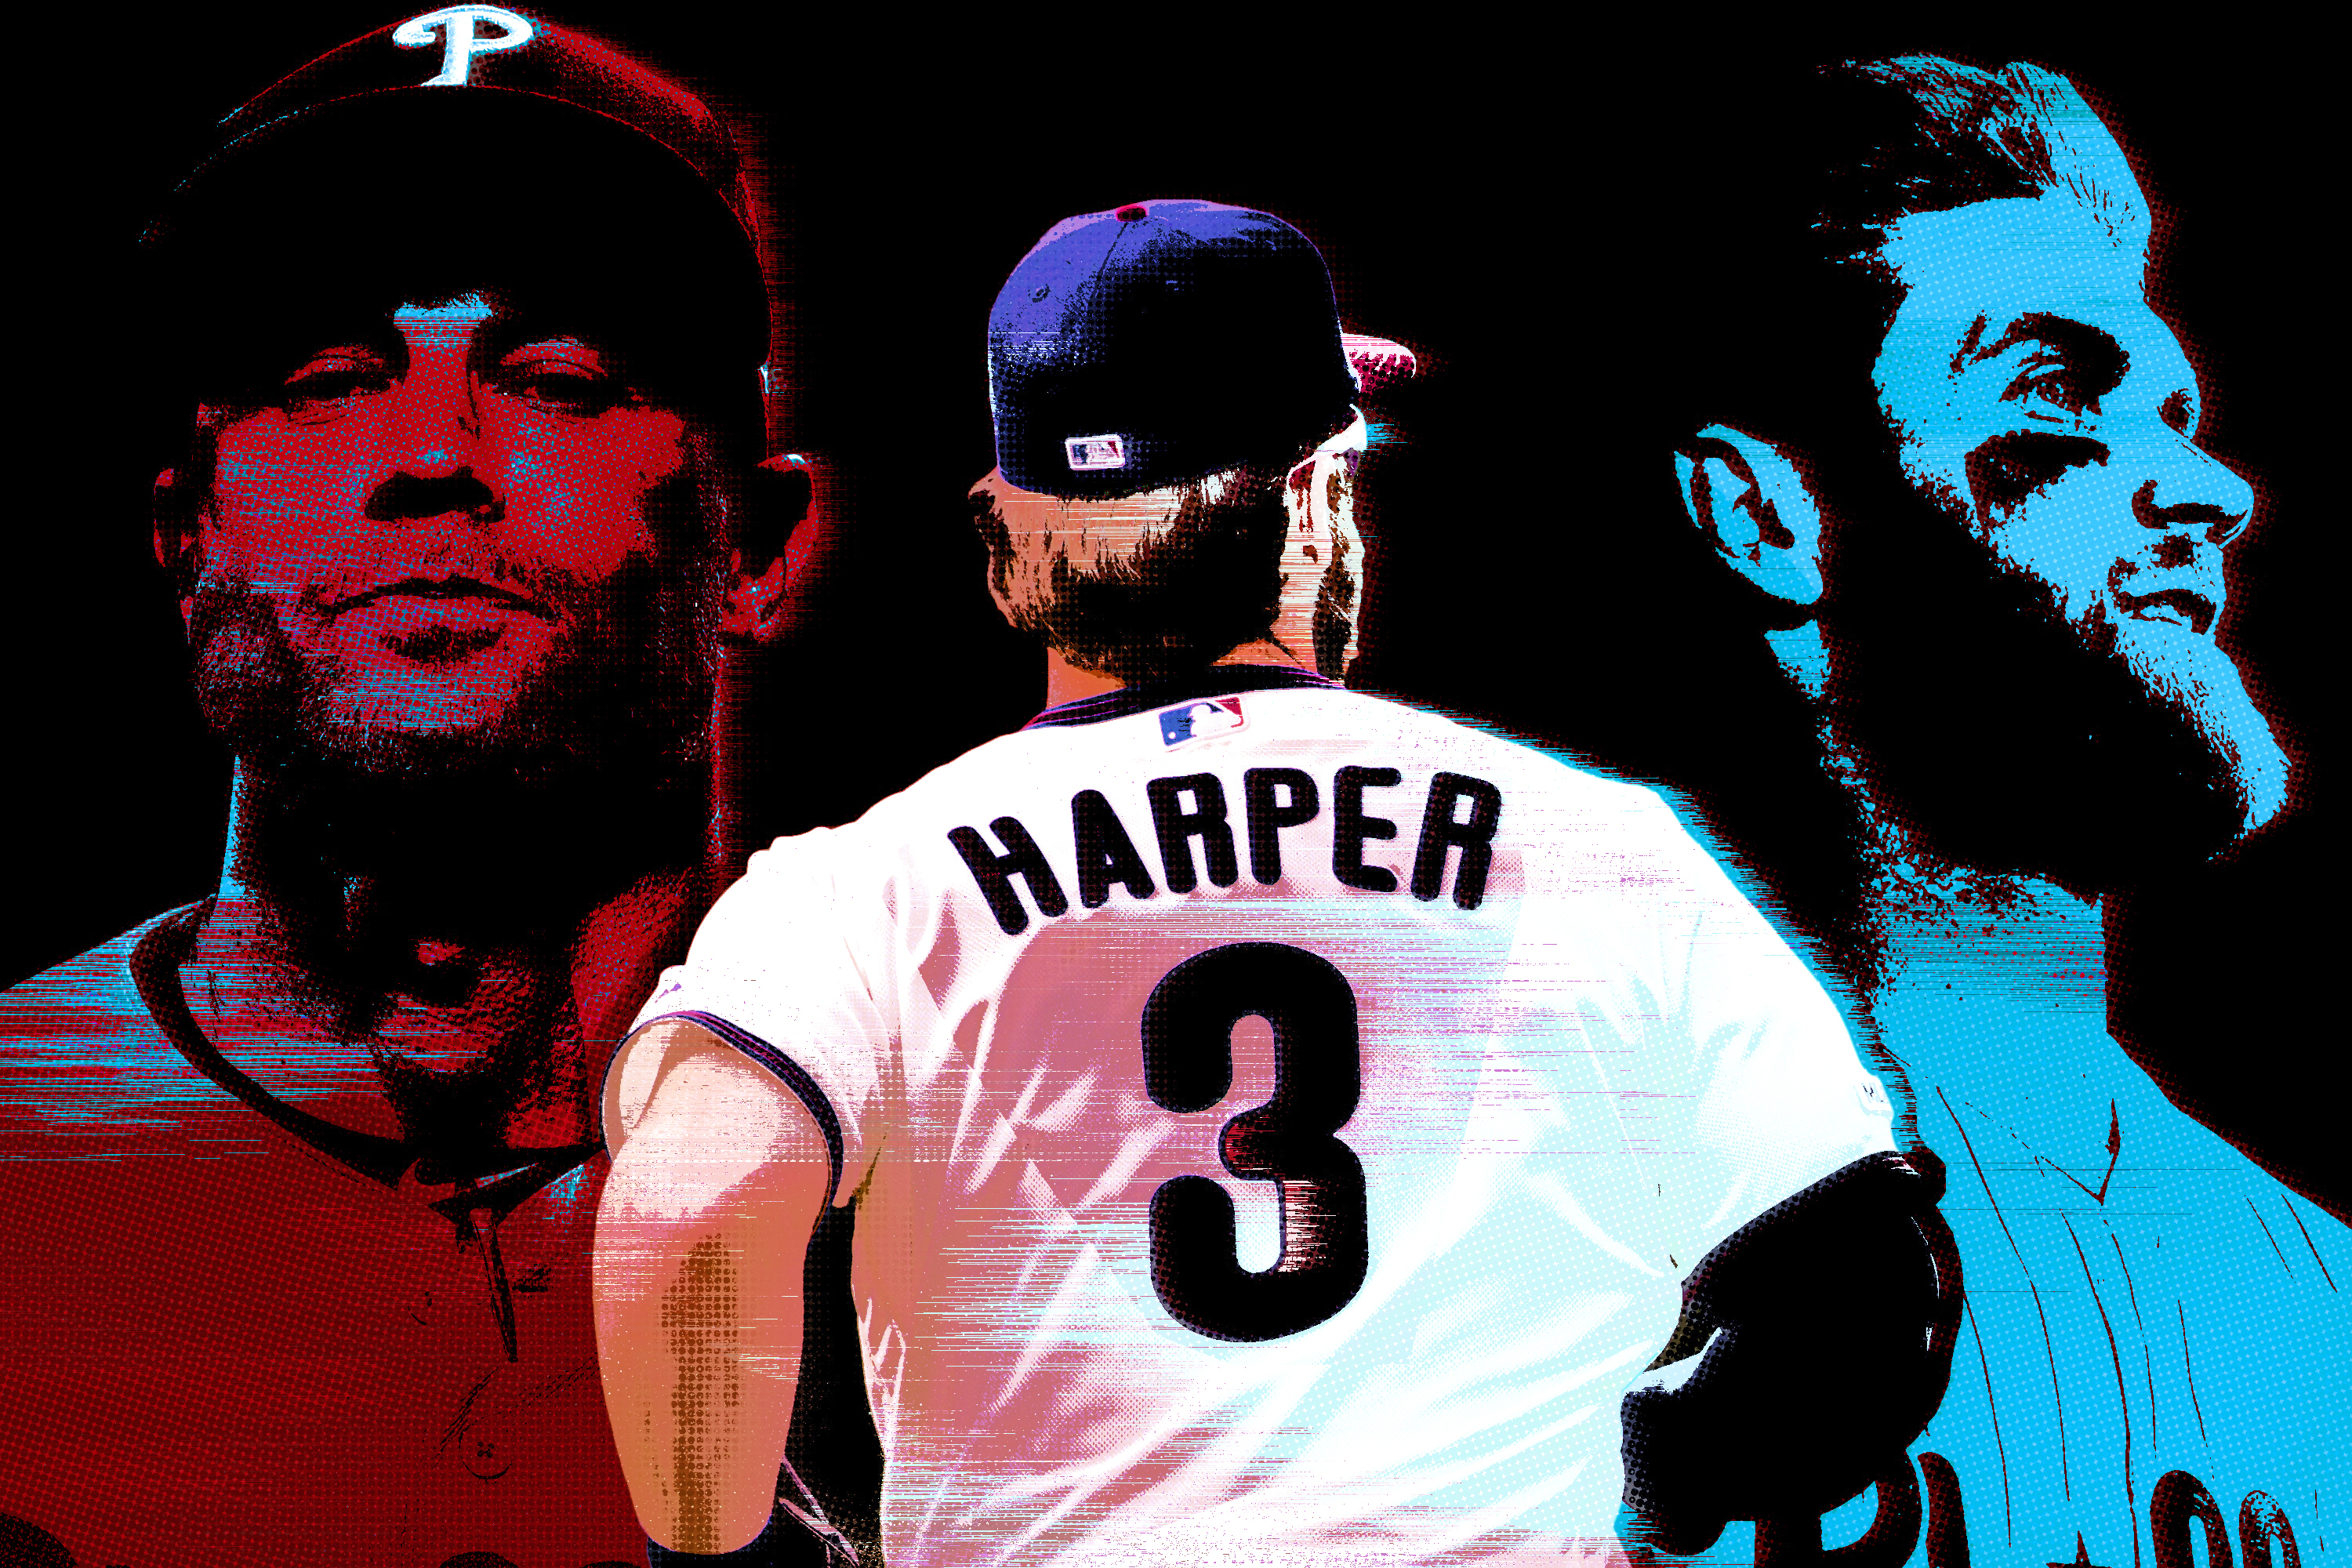 Phillies Manager Rob Thomson On the HOT SEAT?, Bryce Harper CALLS OUT  Team?